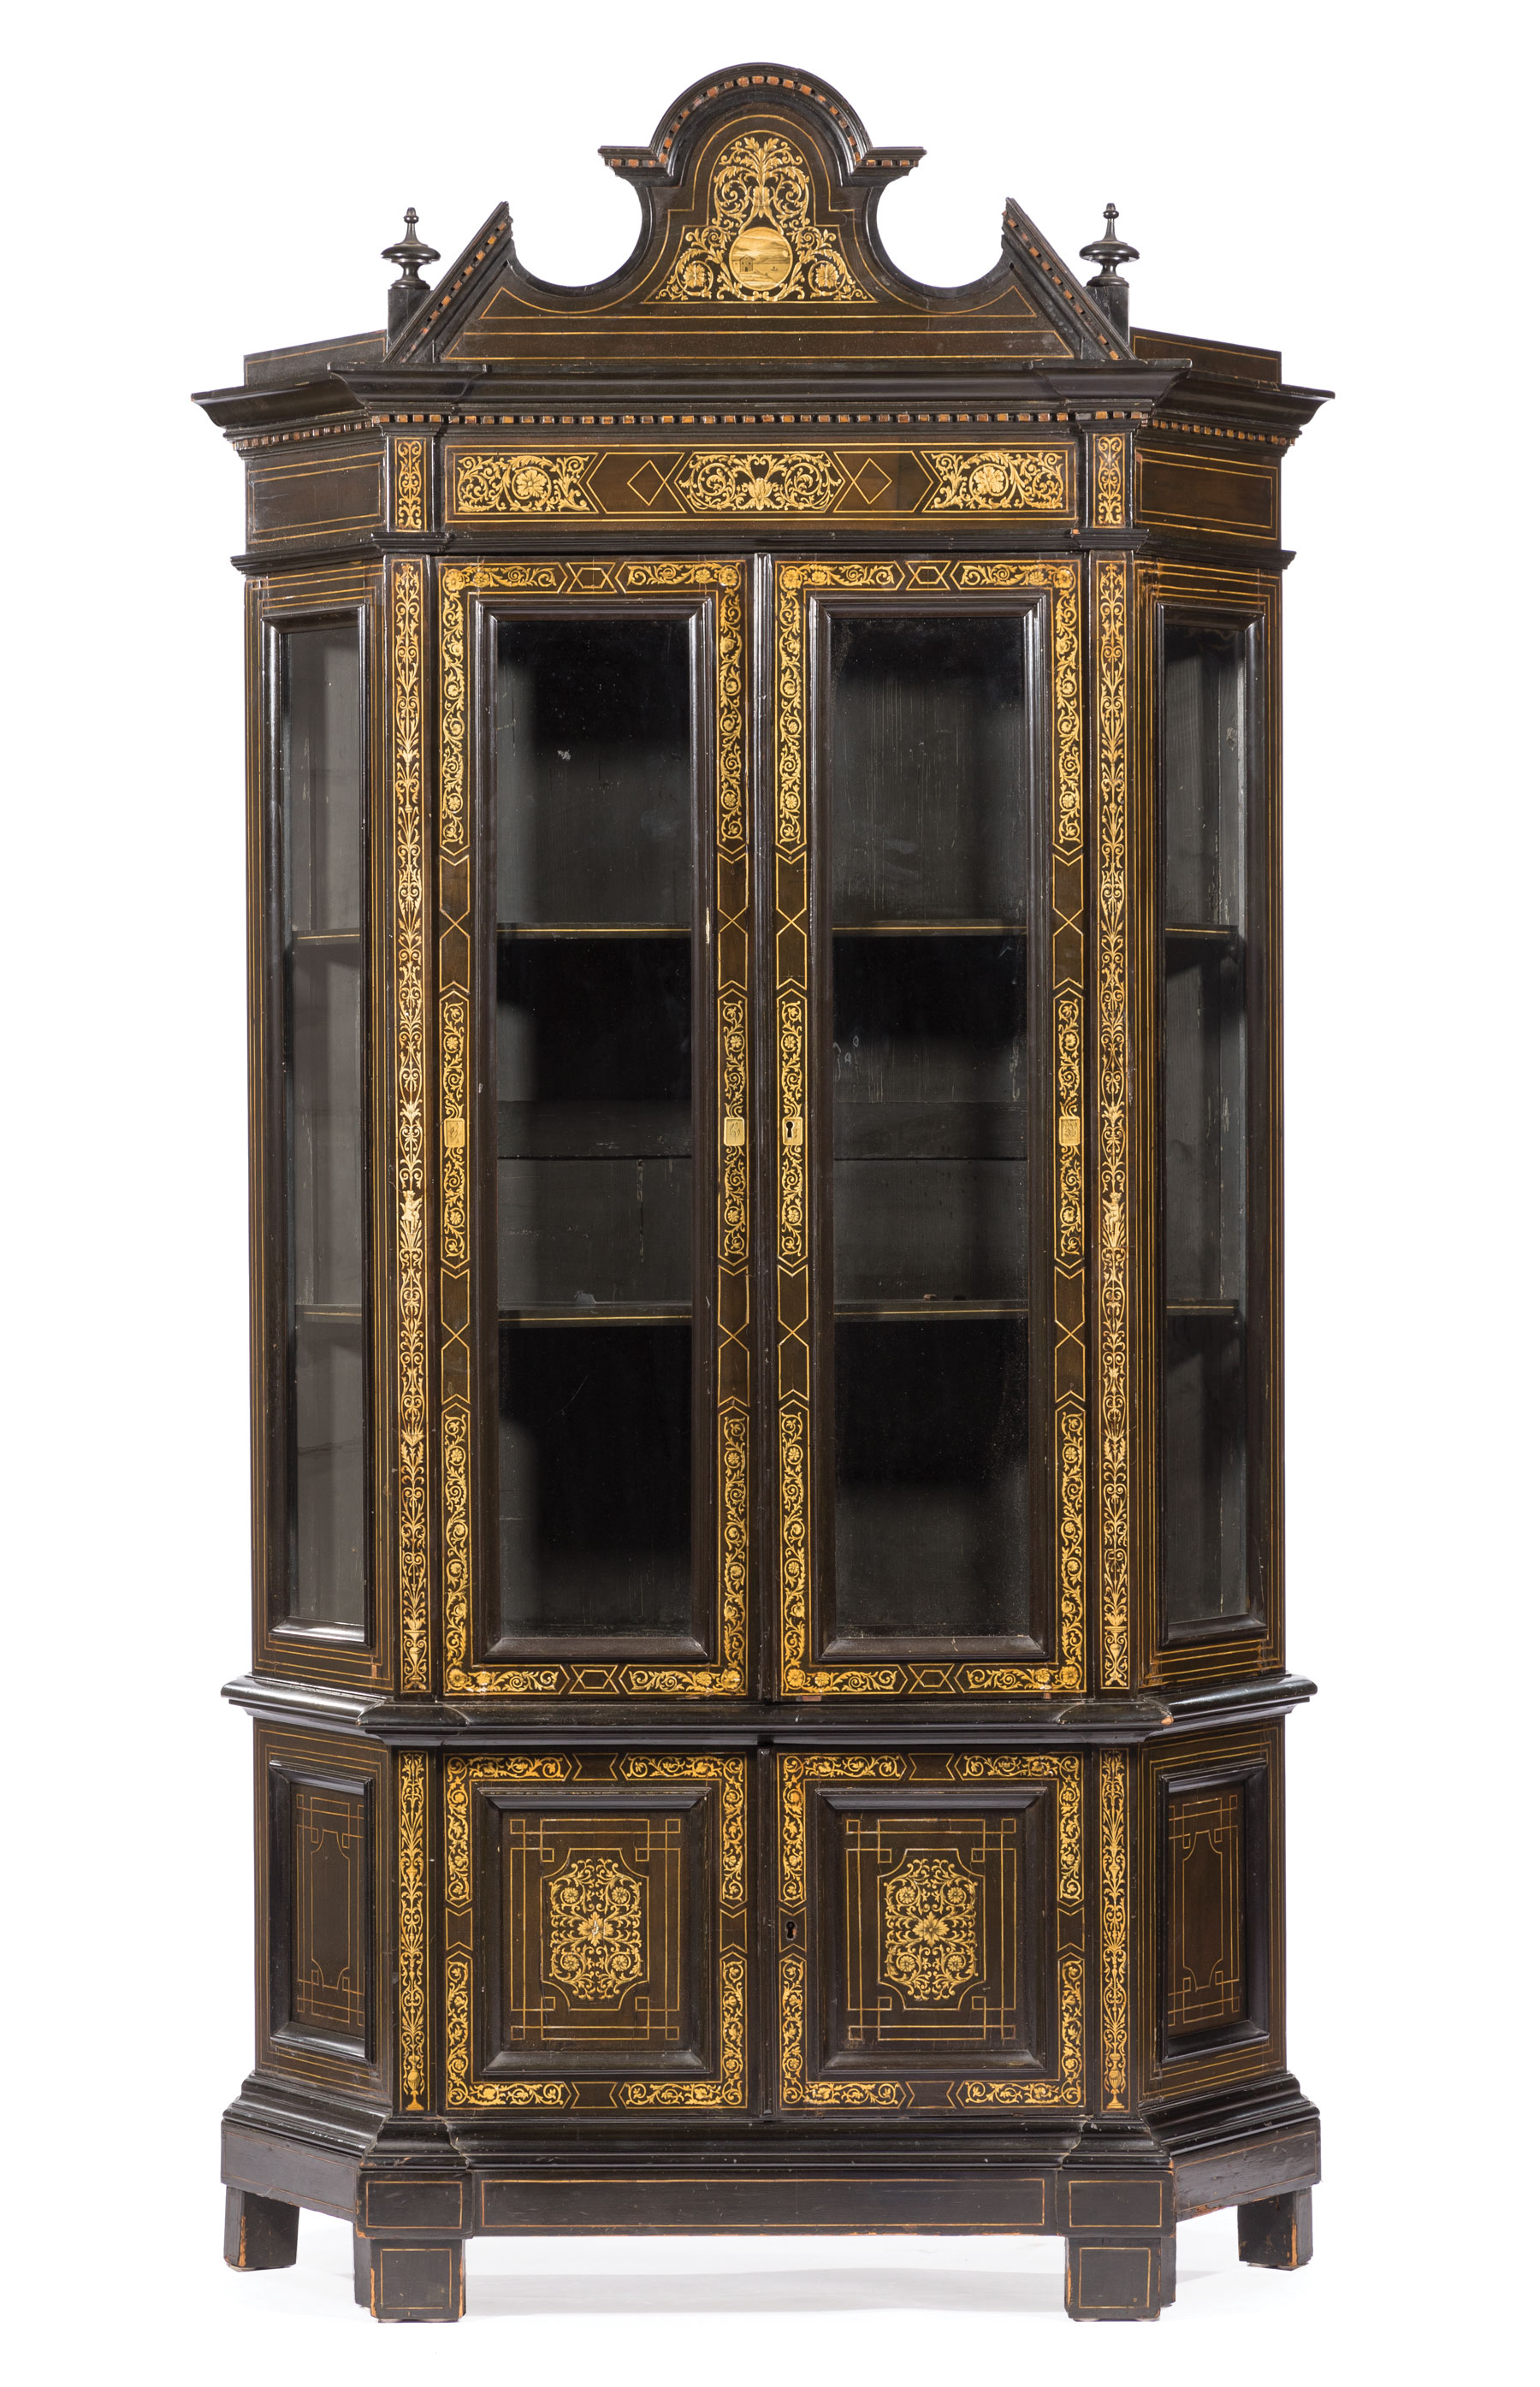 Italian Lombardy Inlaid Collector's Cabinet , late 19th c., broken pediment crest with central - Image 2 of 3